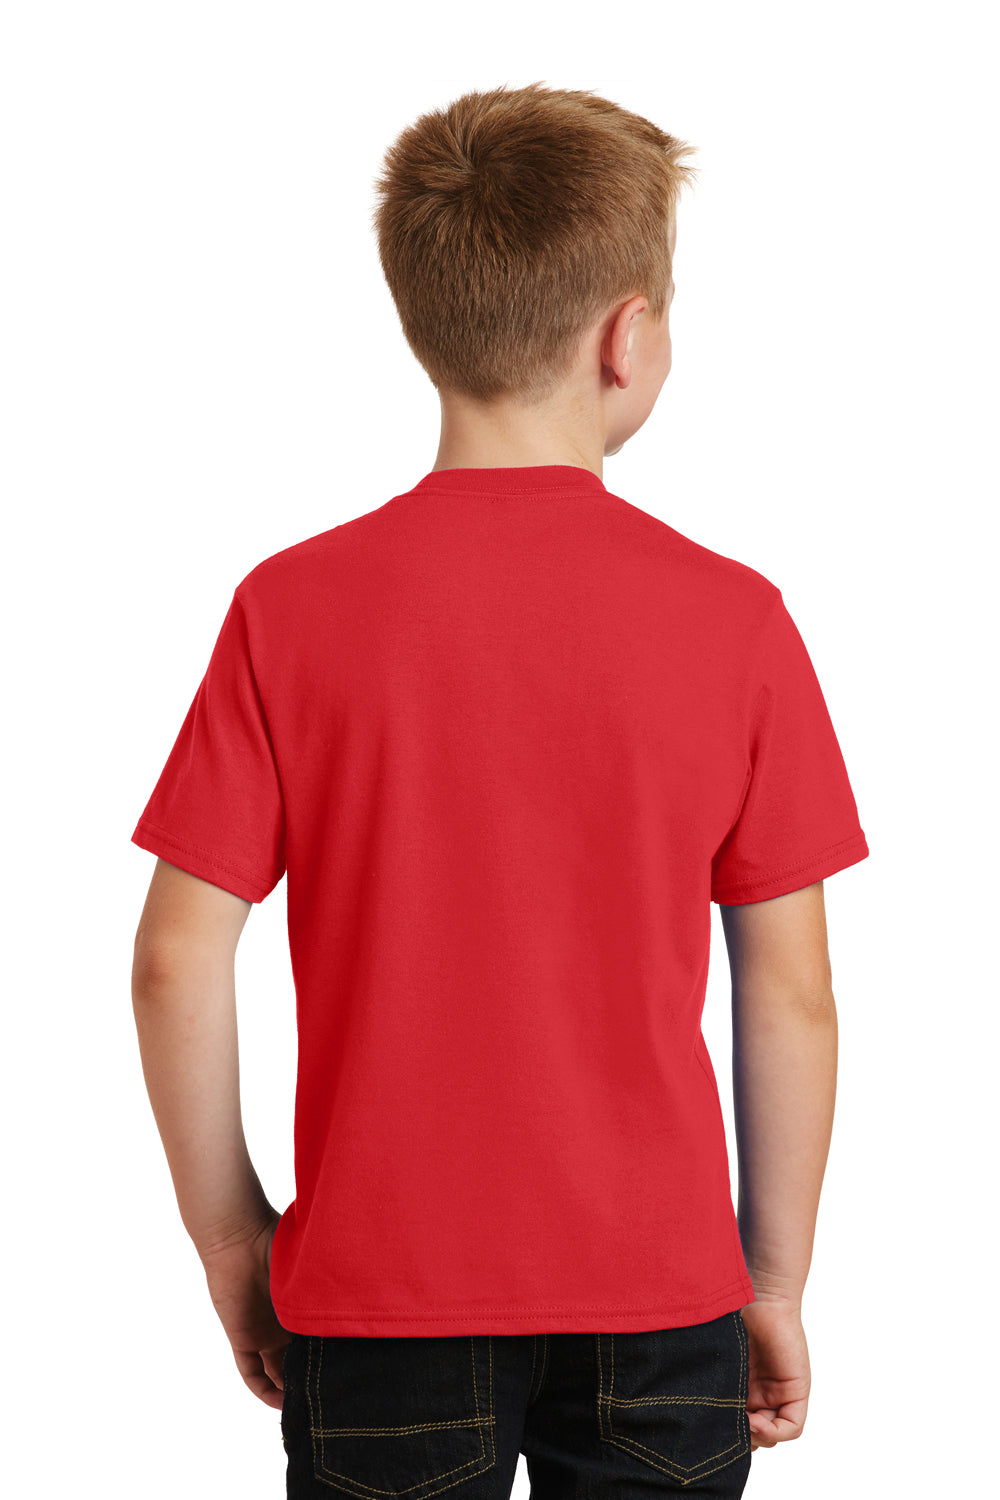 Port & Company PC450Y Youth Fan Favorite Short Sleeve Crewneck T-Shirt Red Back